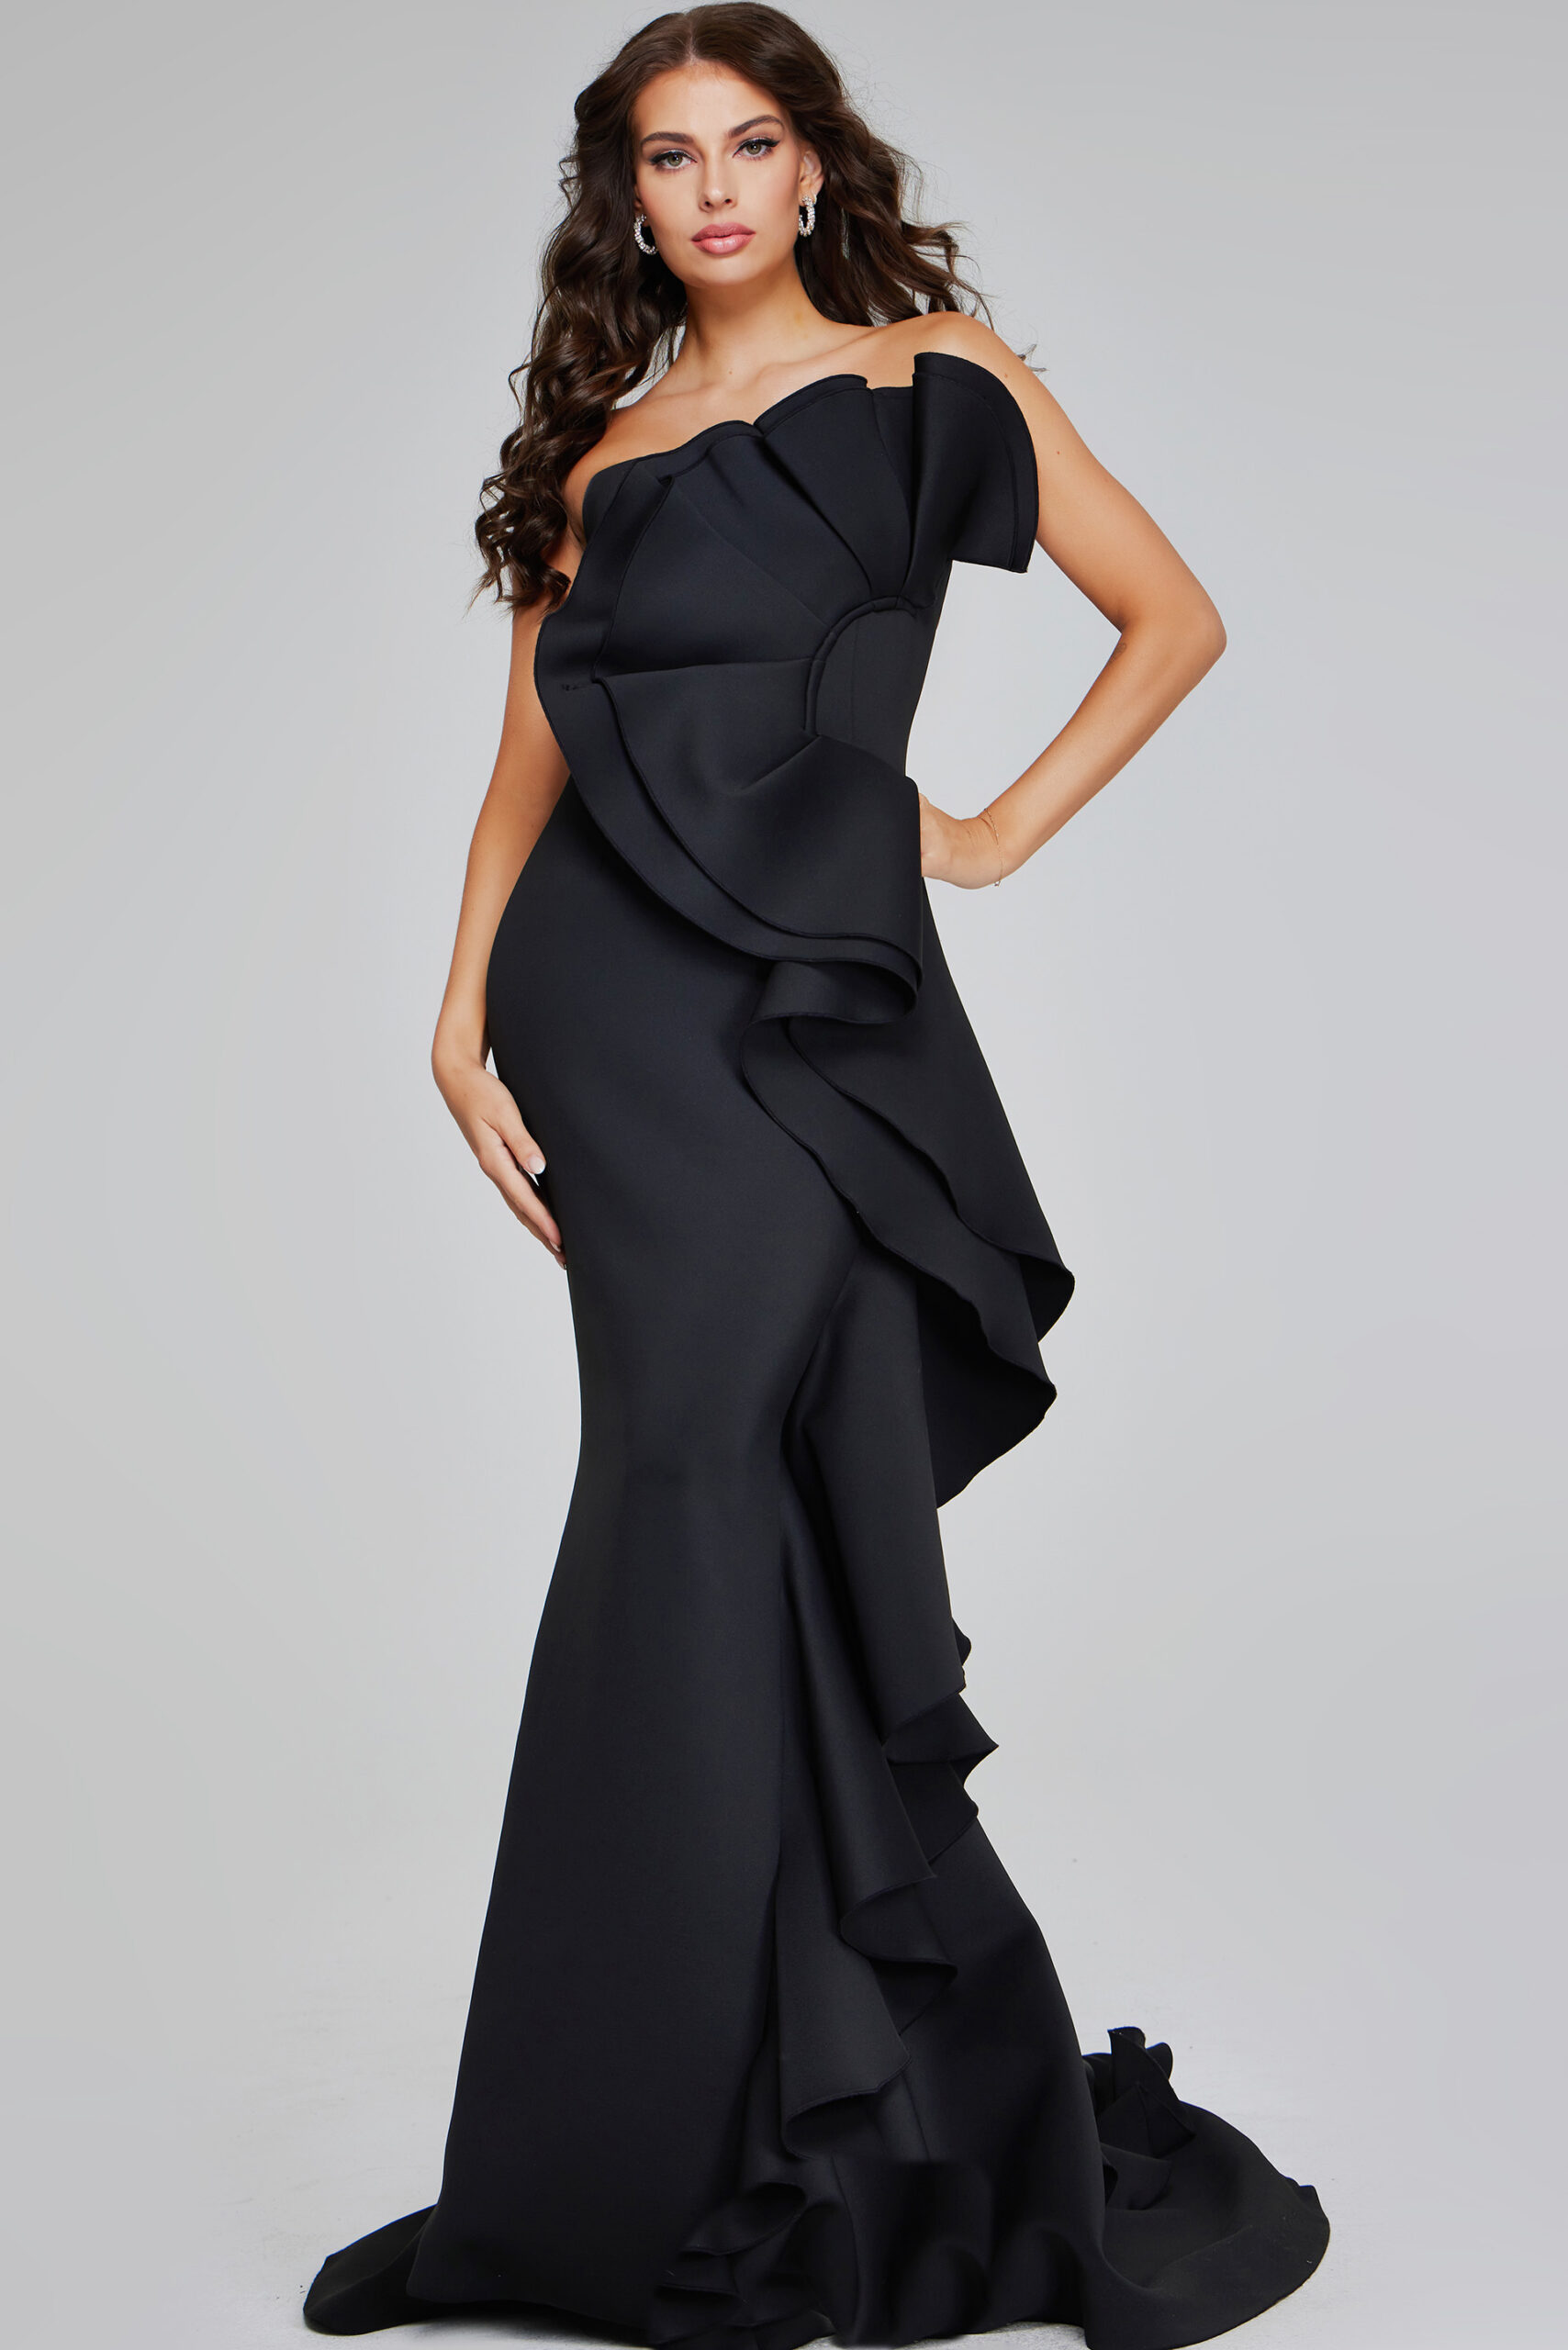 Model wearing Strapless Black Ruffled Gown 42543